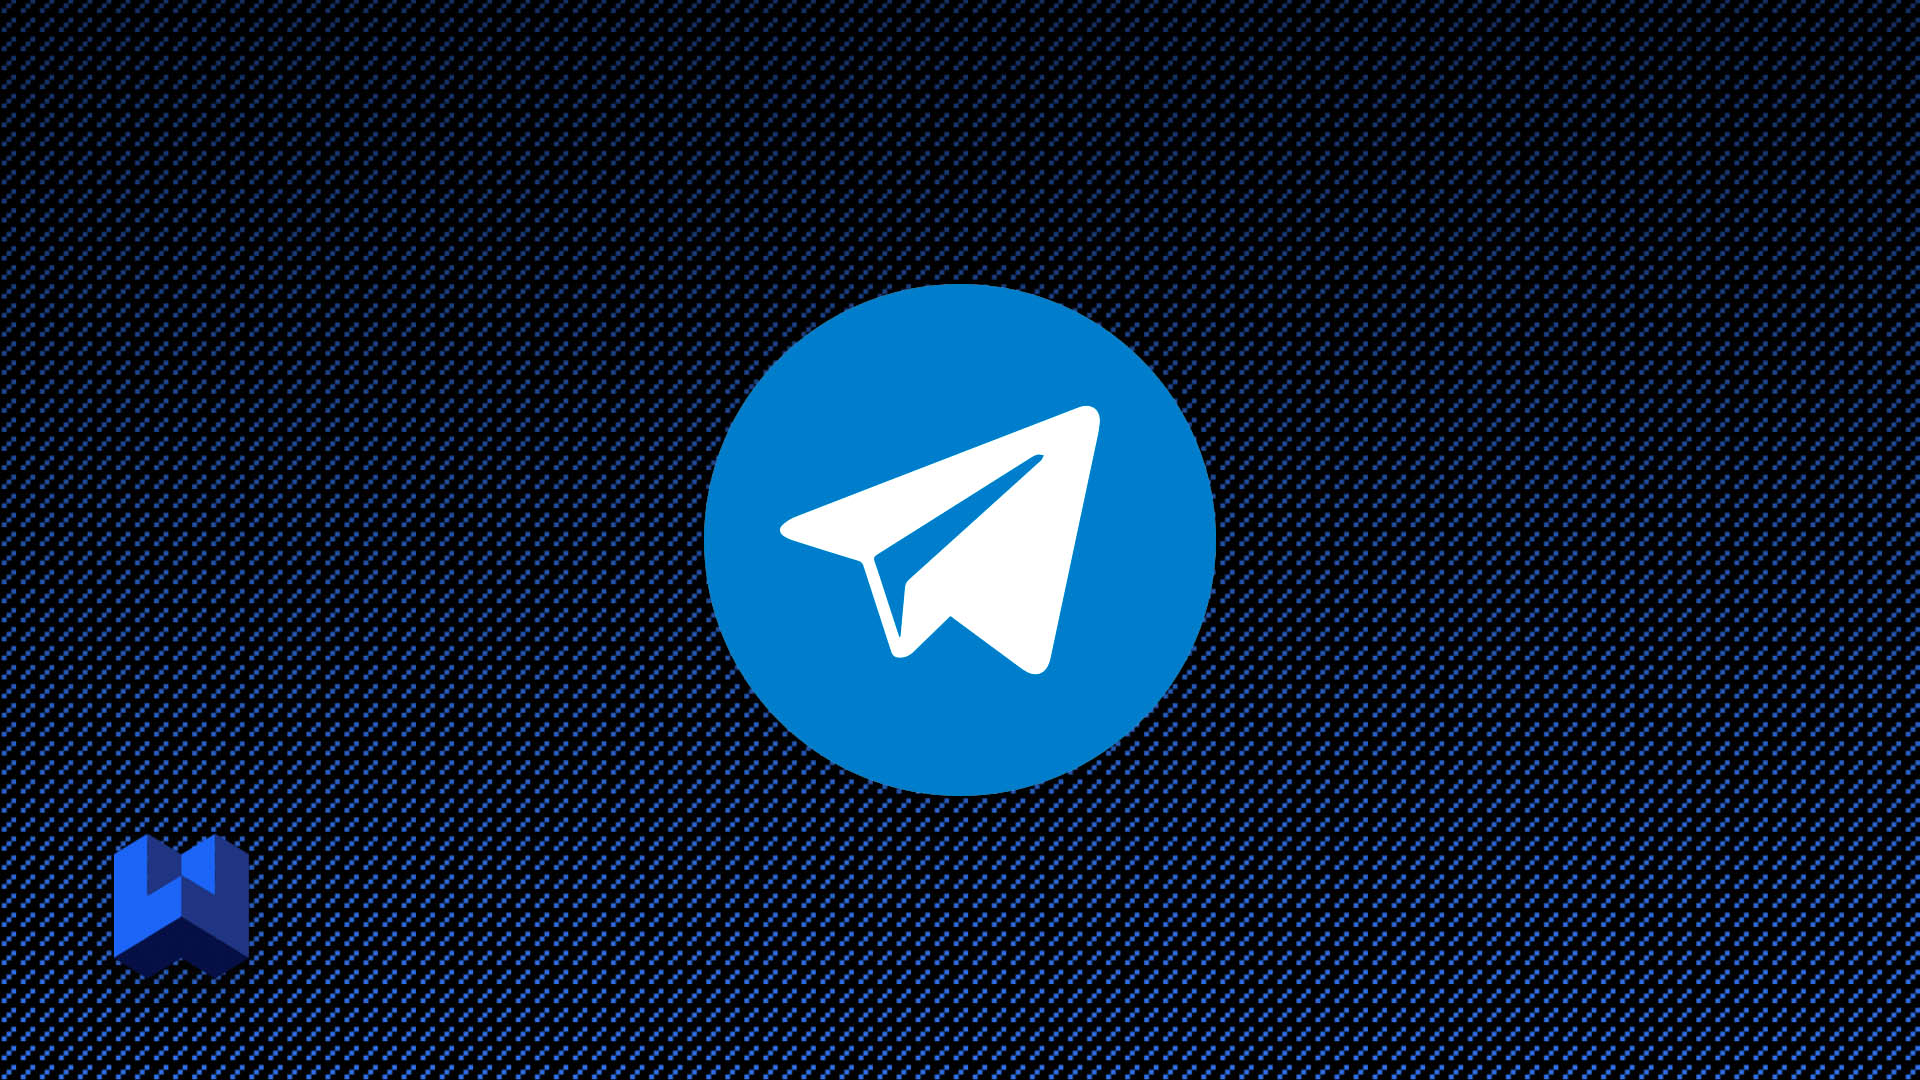 What is Gram: The TON (Telegram Open Network) cryptocurrency